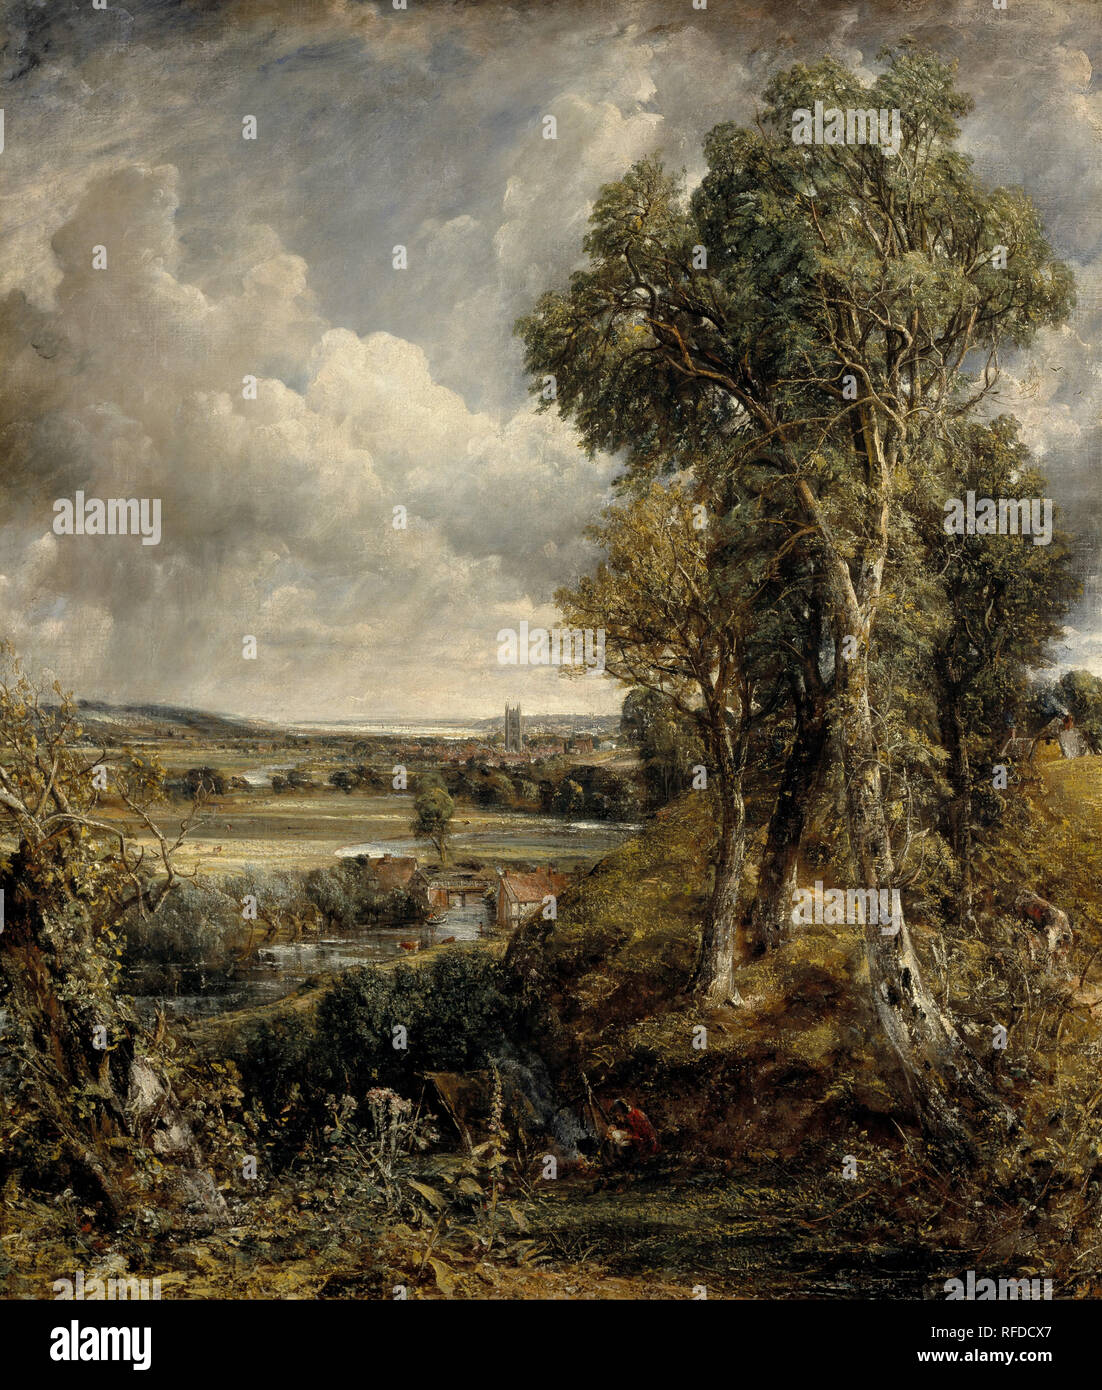 The Vale of Dedham. Date/Period: 1828. Painting. Oil on canvas. Height: 1,220 mm (48.03 in); Width: 1,445 mm (56.88 in). Author: John Constable. Stock Photo